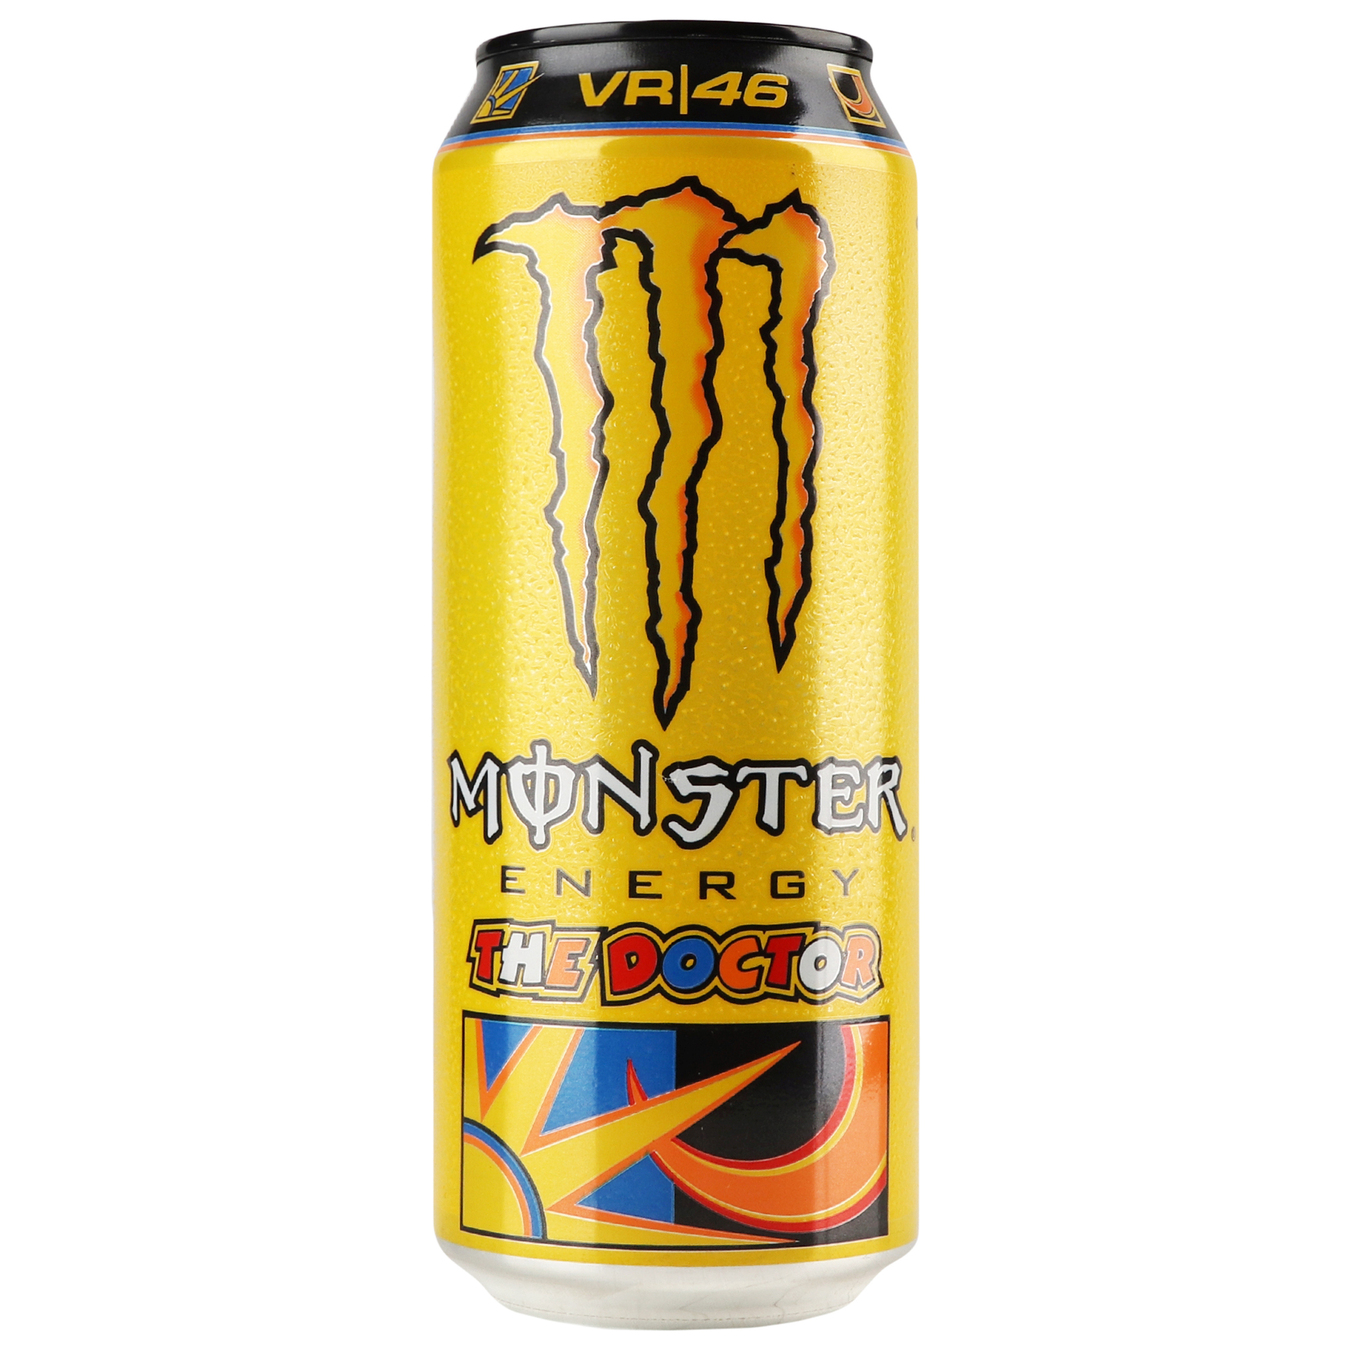 Energy drink Monster Energy The Doctor 0.5 l iron can